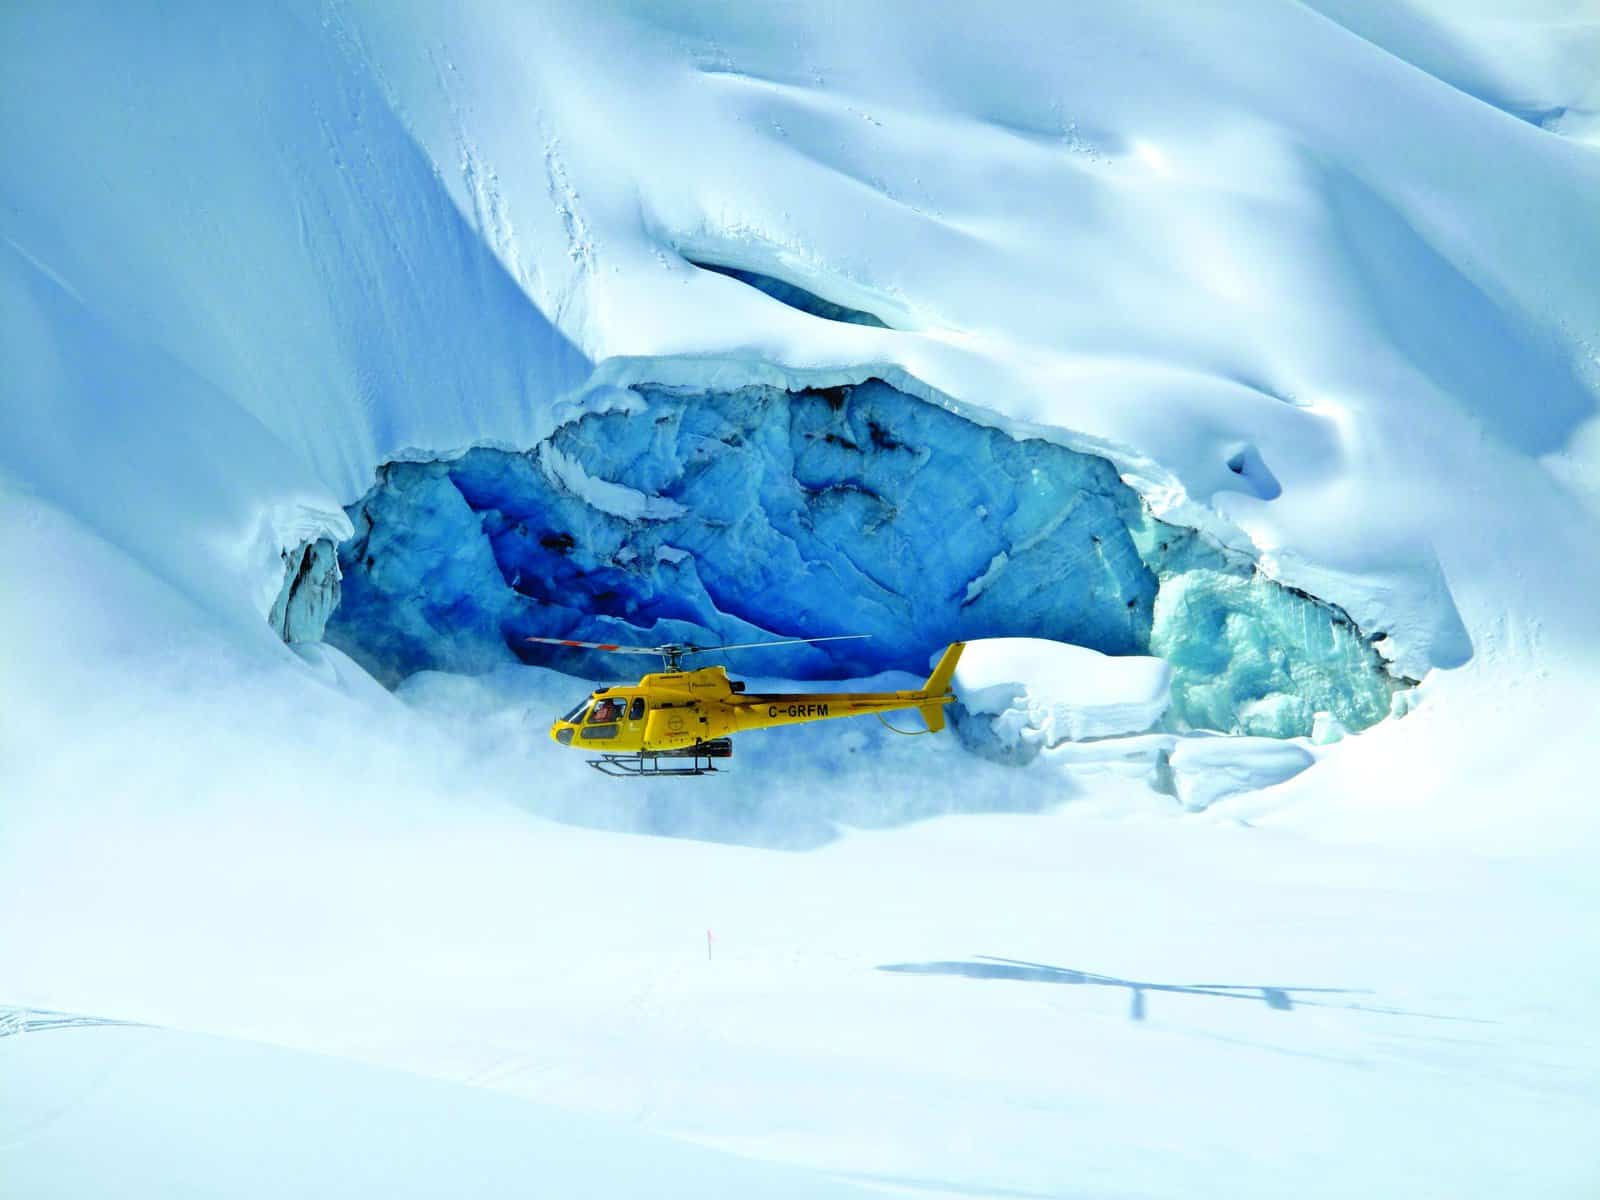 Read more about the article The cold truth about heliskiing…it’s addictive